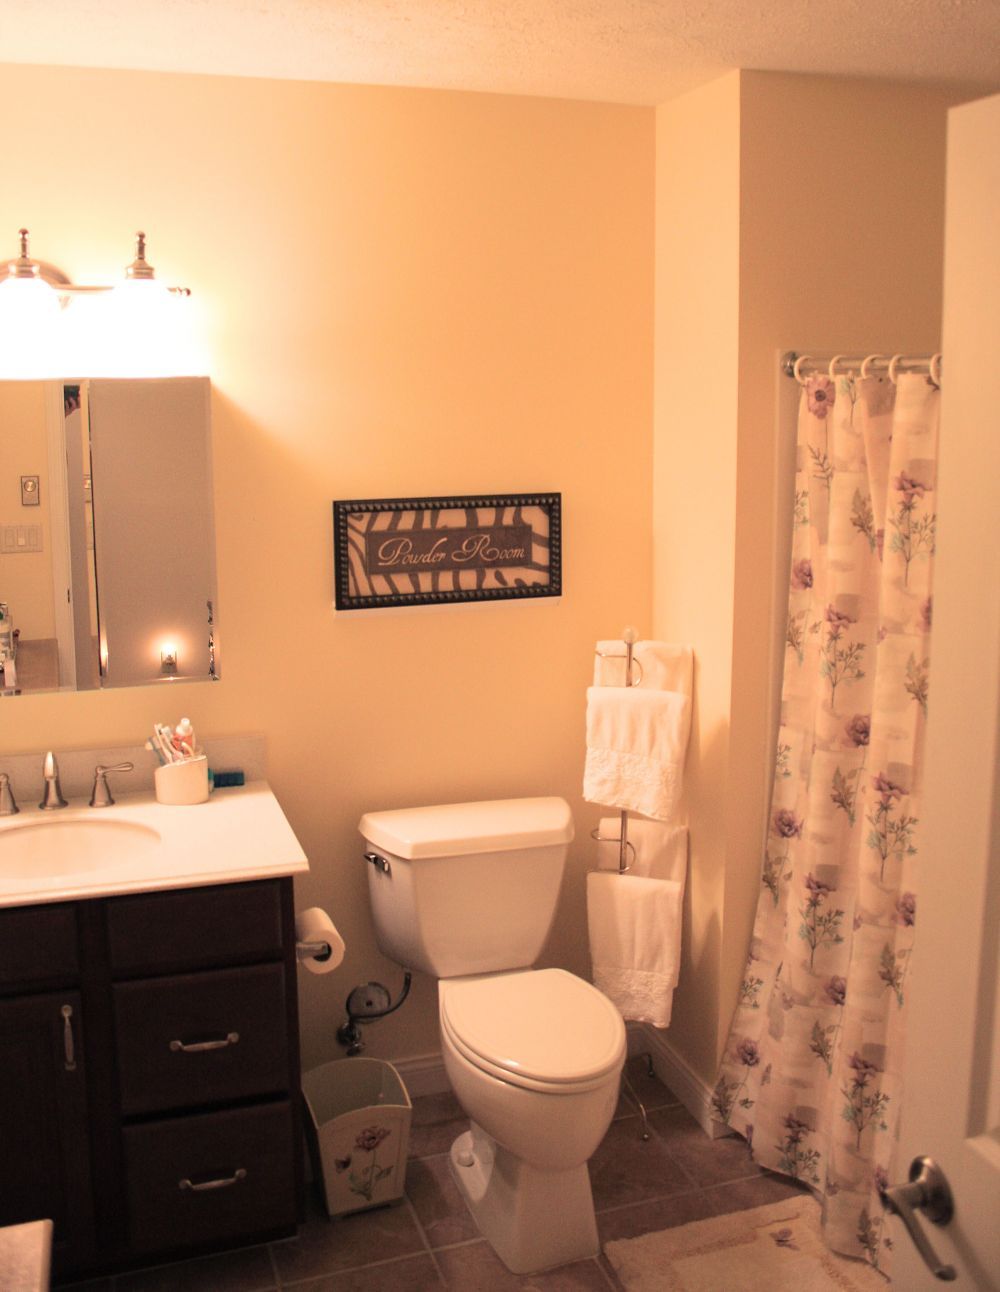 Interior view of a bathroom in Hopedale Commons senior living community with sink and toilet.